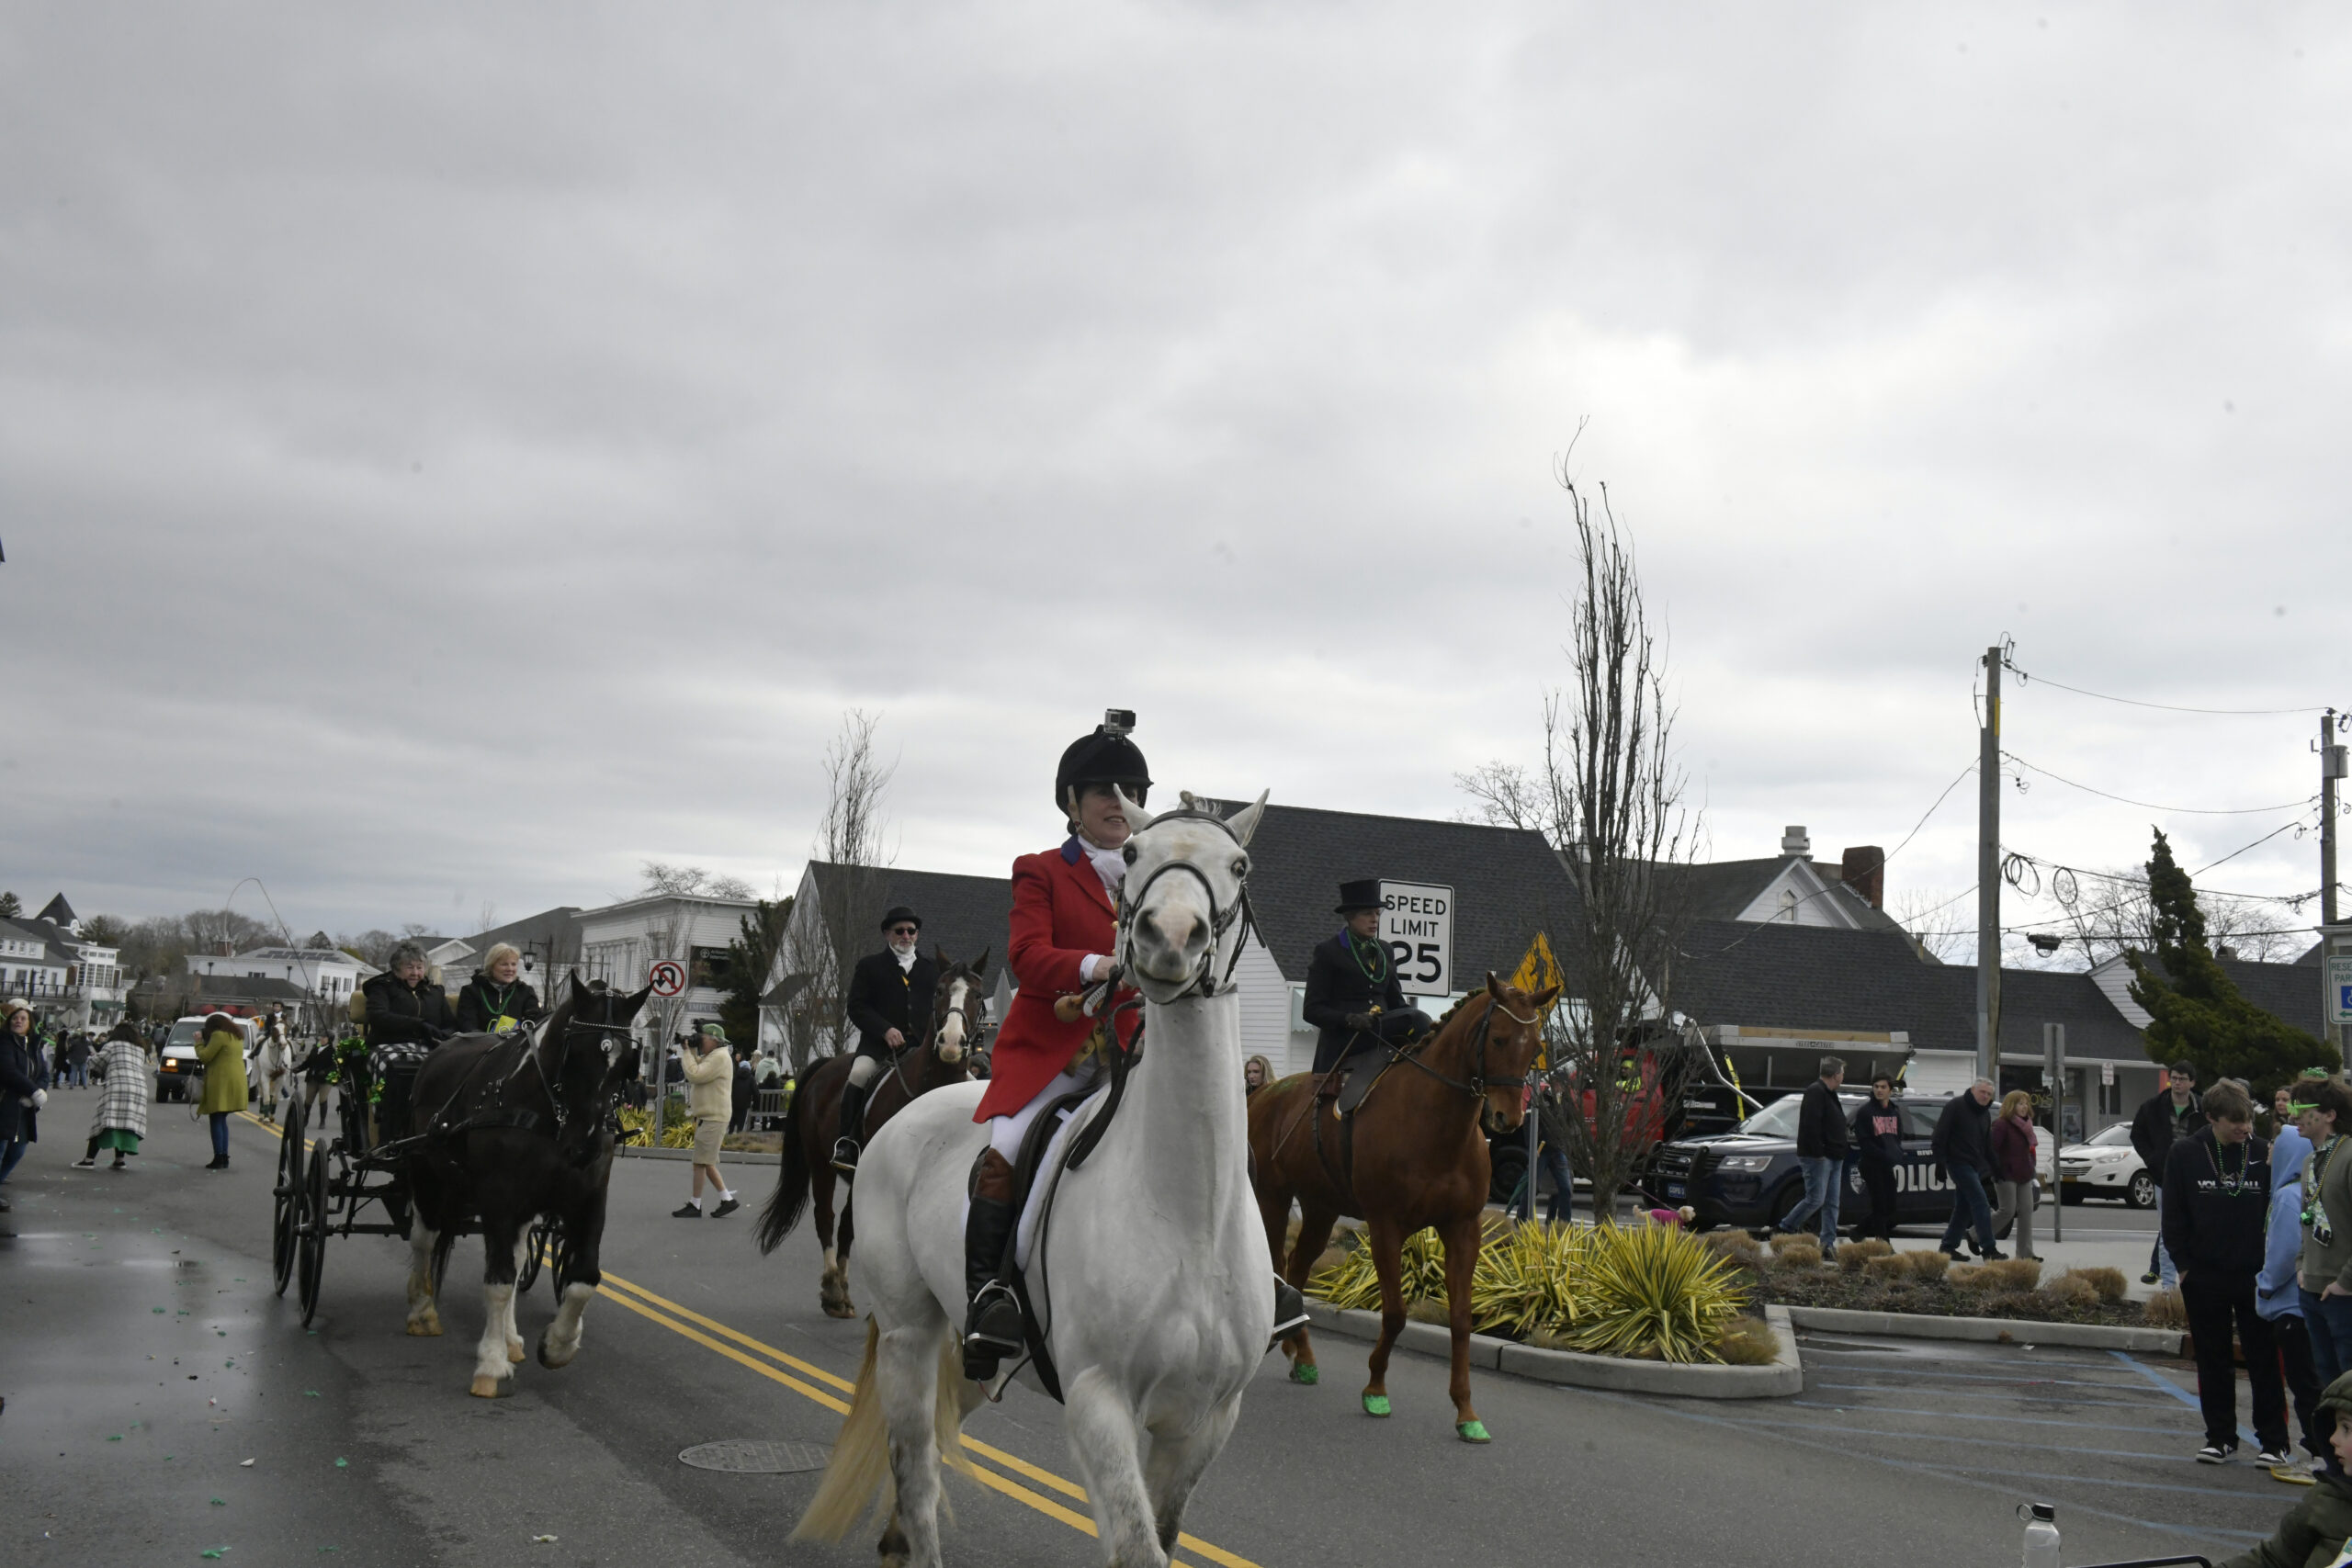 Members of the Smithtown Hunt Club.